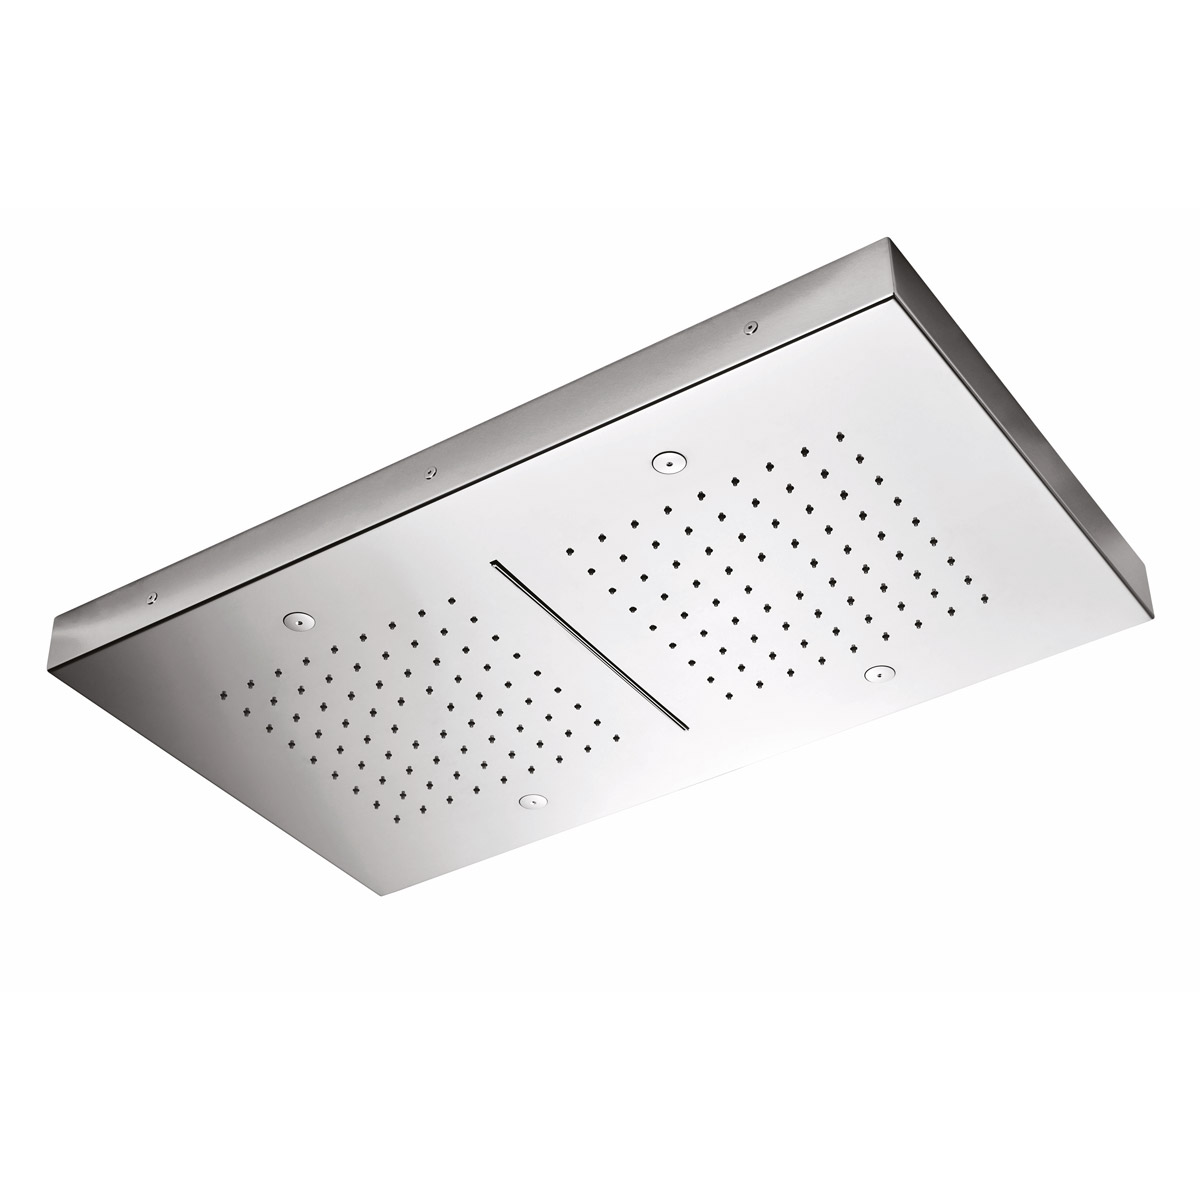 Ceiling Stainless Steel Shower Head